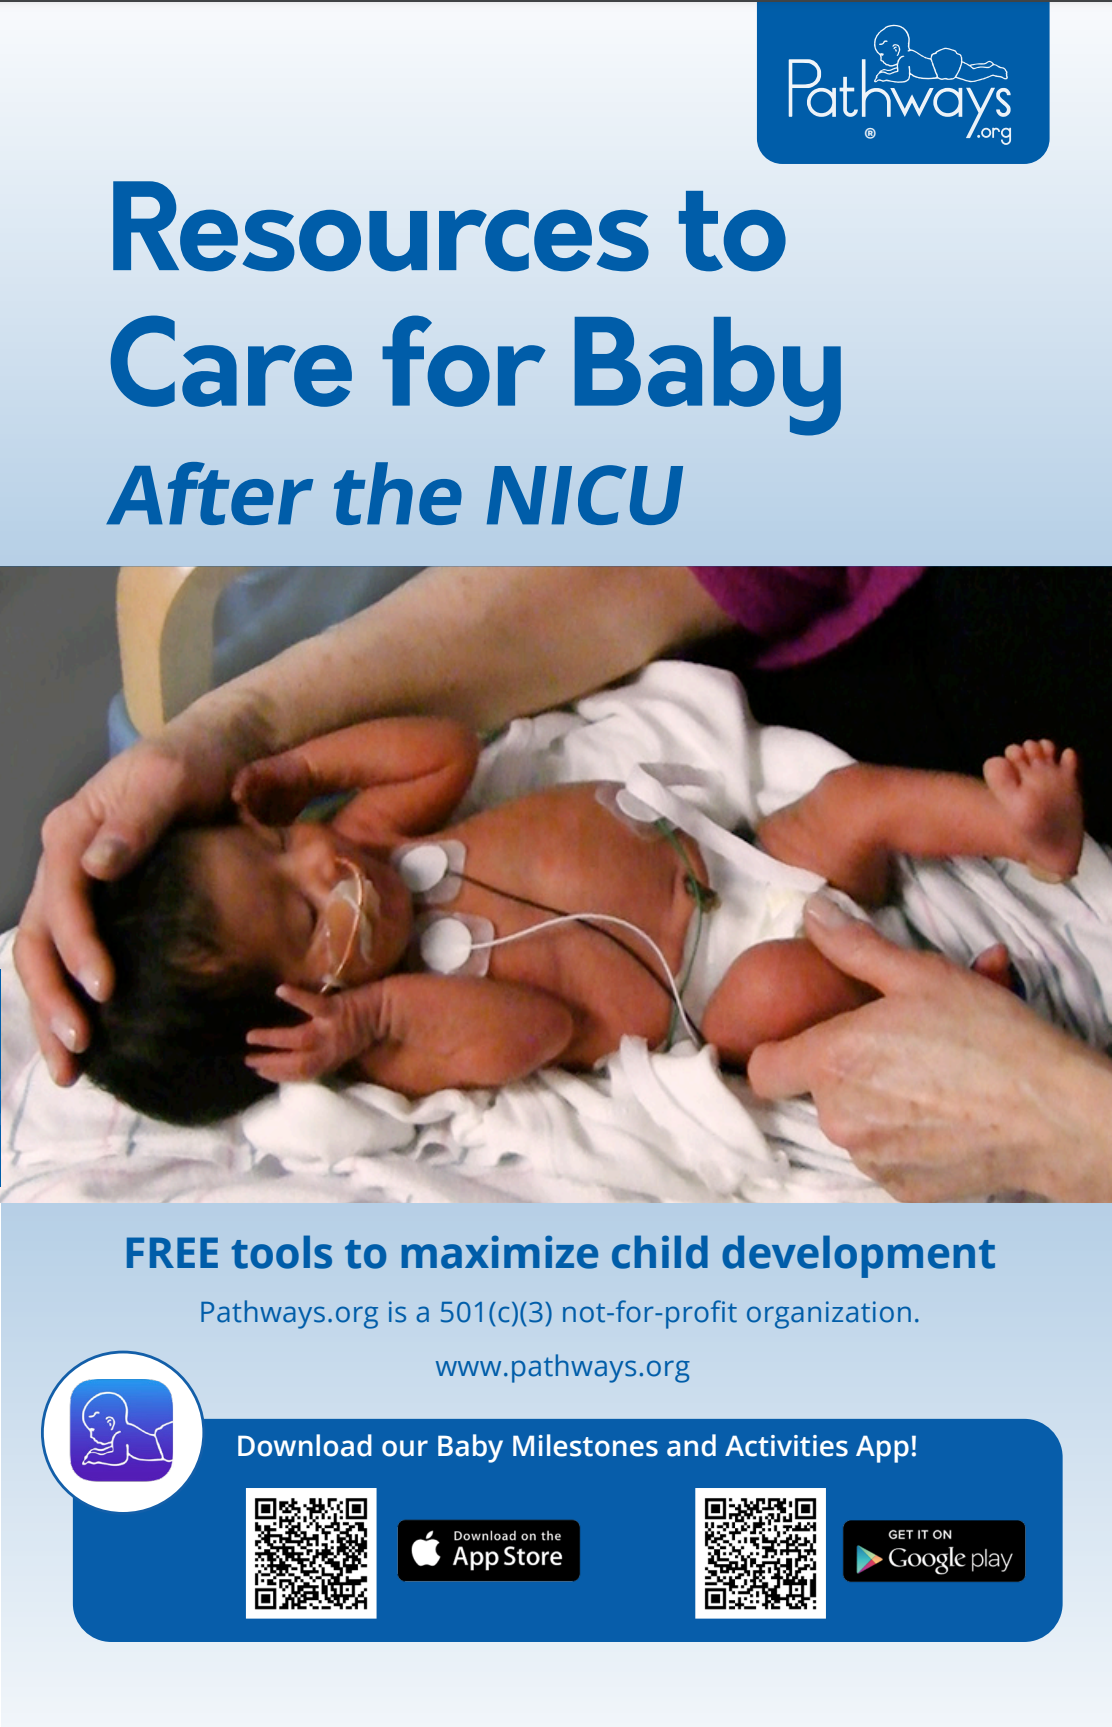 Resources to care for baby after NICU brochure cover